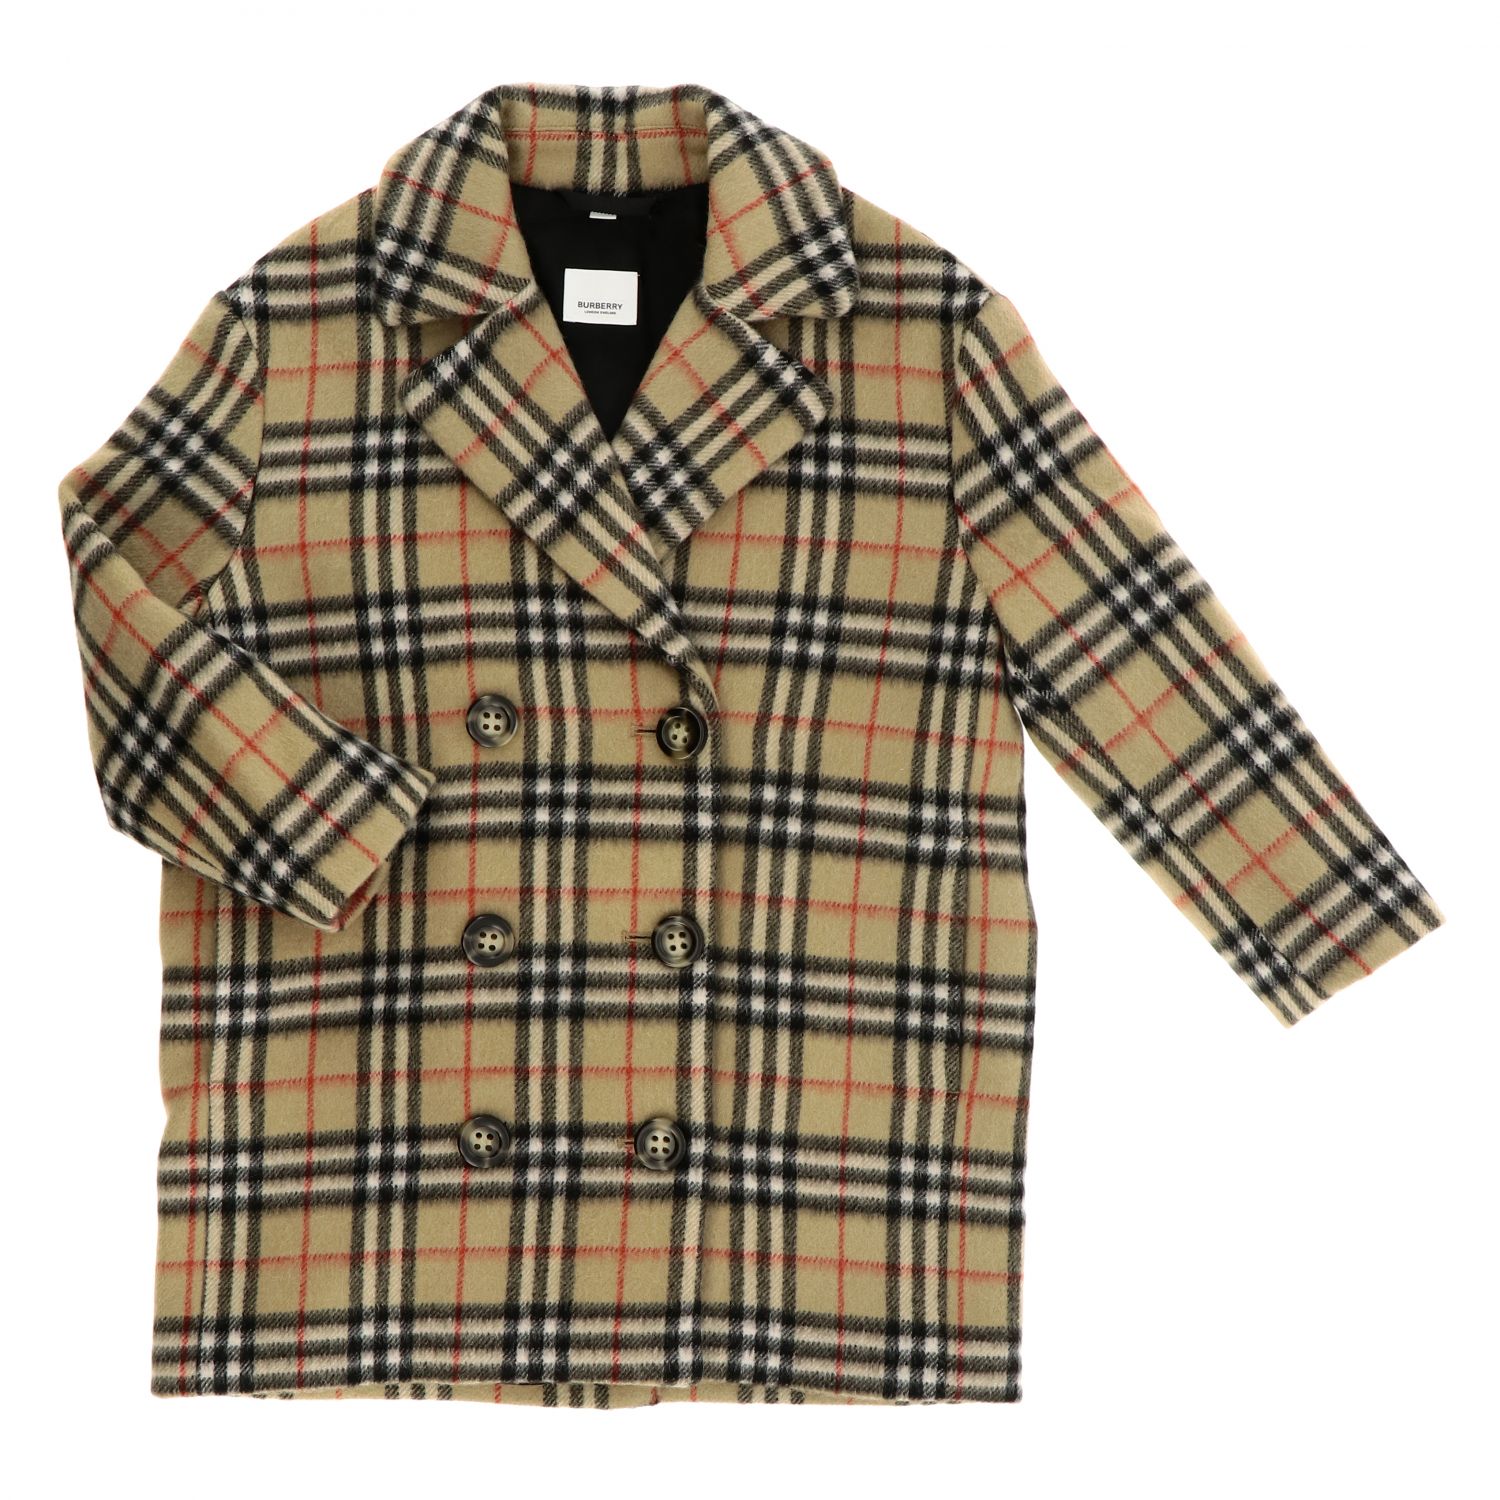 Burberry double-breasted coat in check fabric | Coat Burberry Kids ...